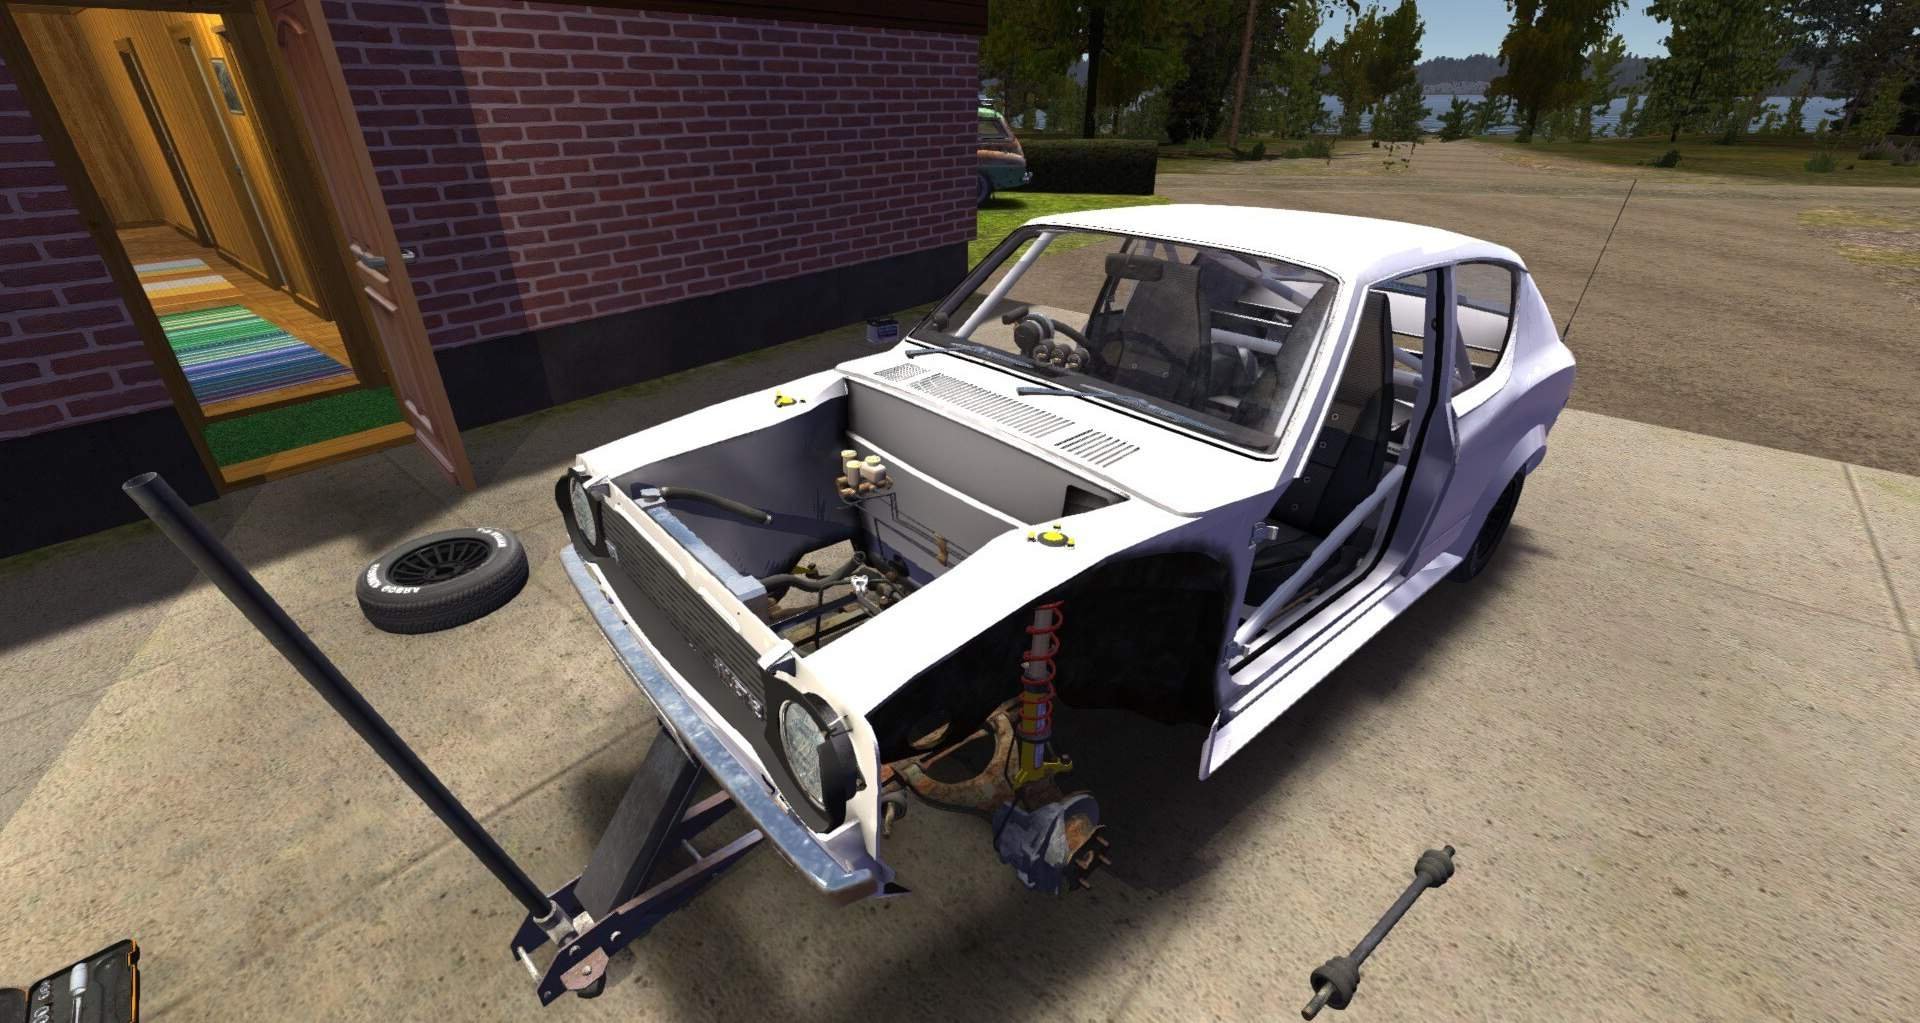 My Summer Car Gameplay Hints And Tips For Beginners